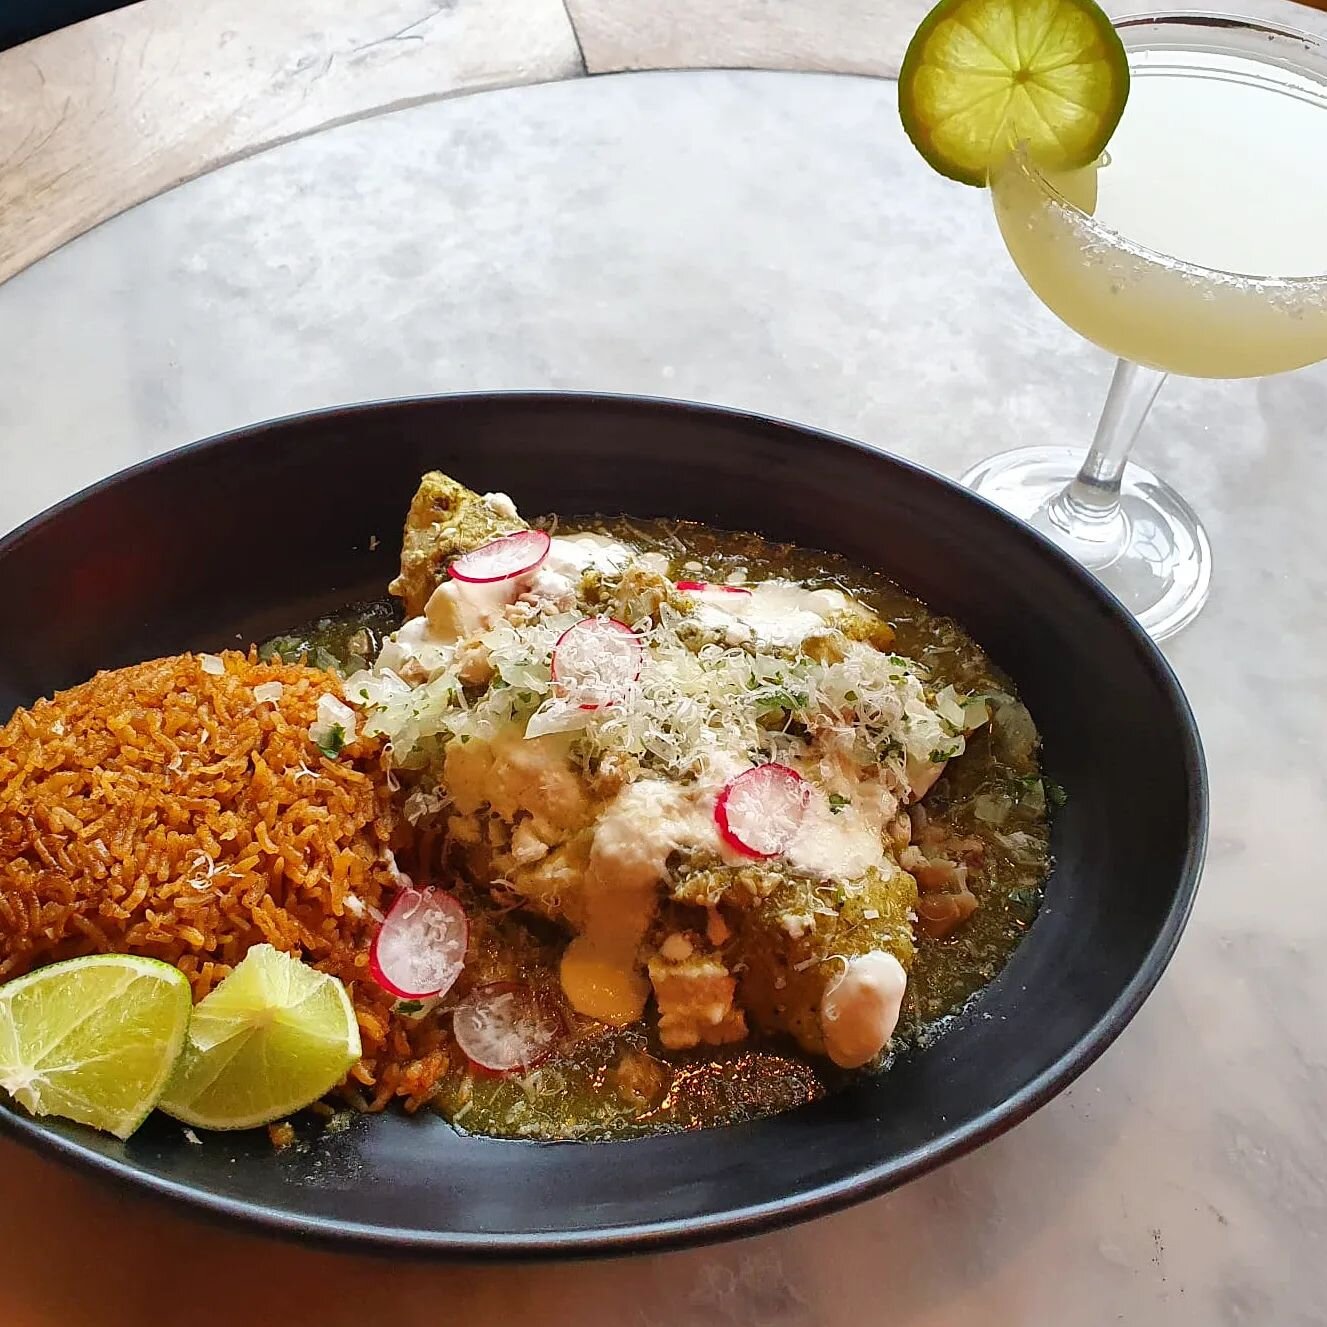 Margaritas and Mexican food, a winning combination ❤️&zwj;🔥 &amp; with National Margarita Day and Taco Tuesday only a day apart... this perfect pairing is a MUST! 

Have you tried our enchiladas?? Insanely good food and tasty 2-4-&pound;15 margarita